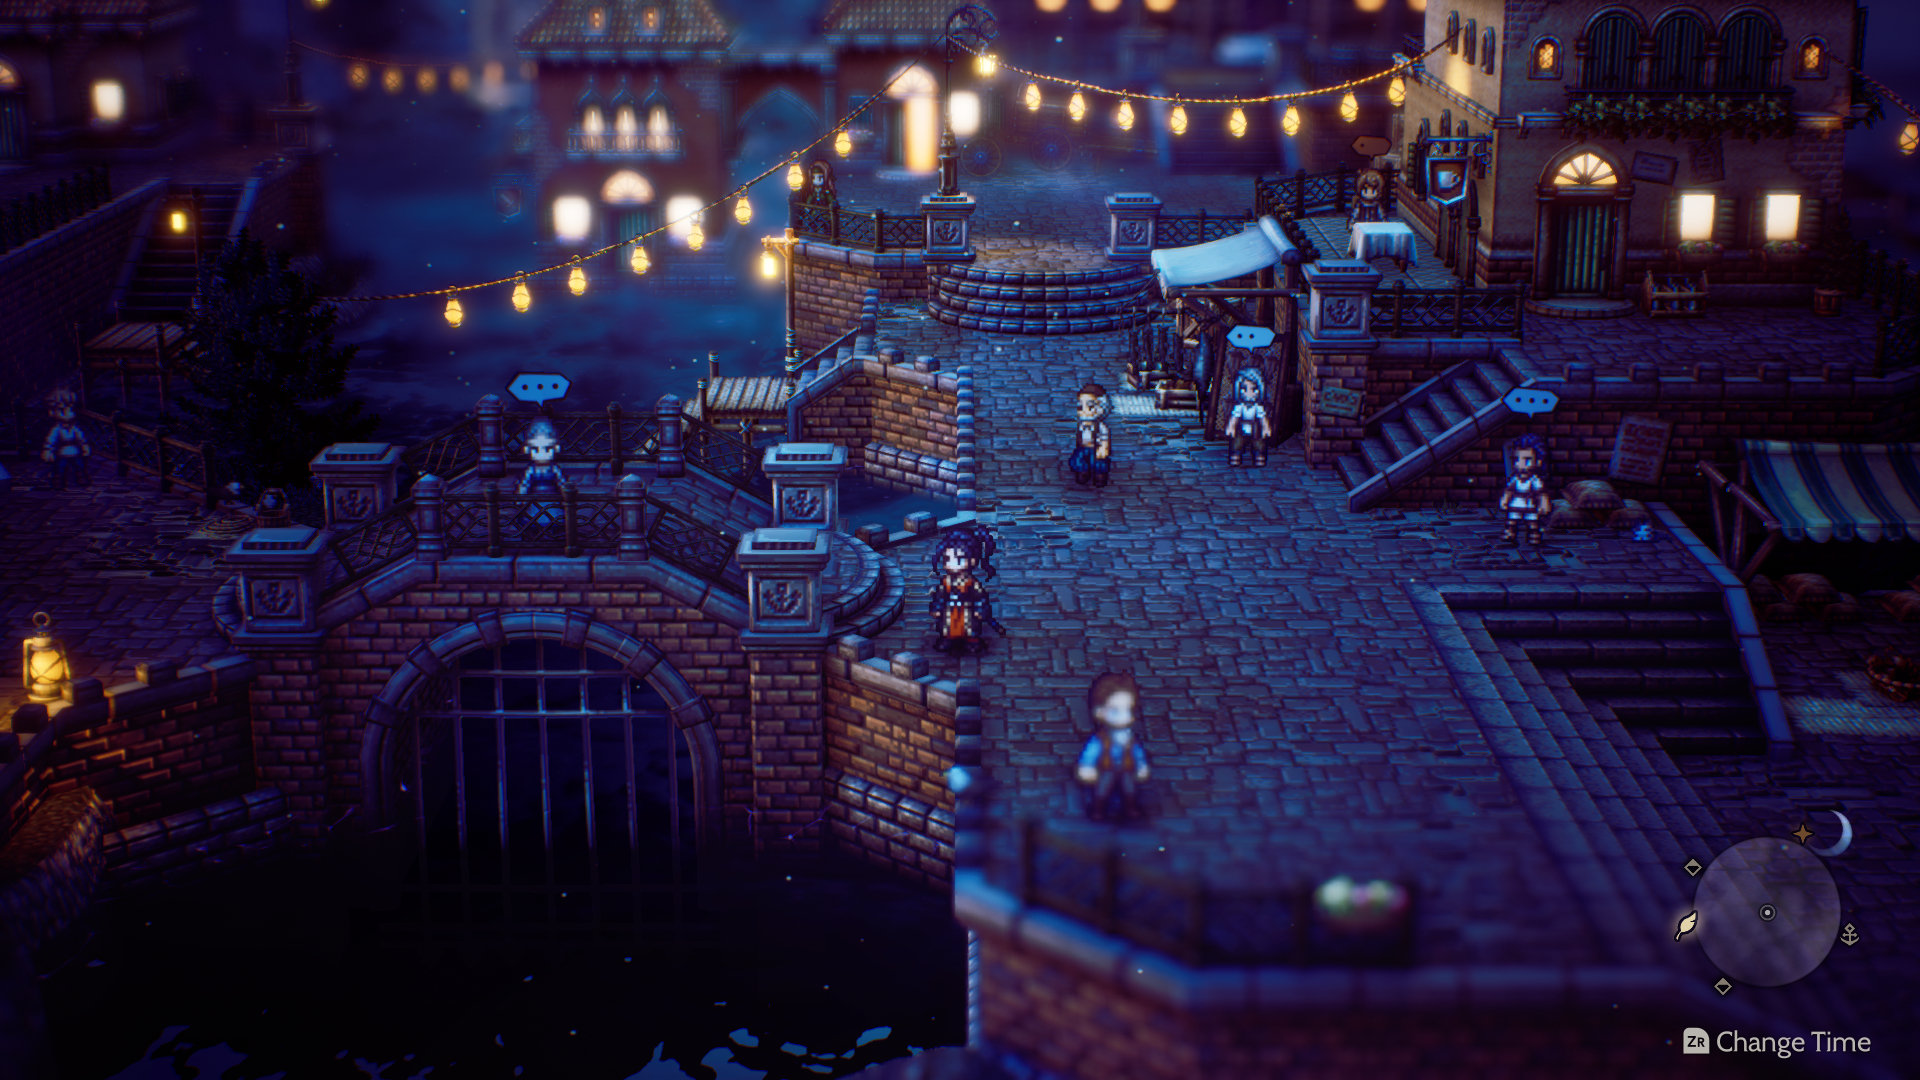 New Octopath Traveler 2 trailer introduces talking lion